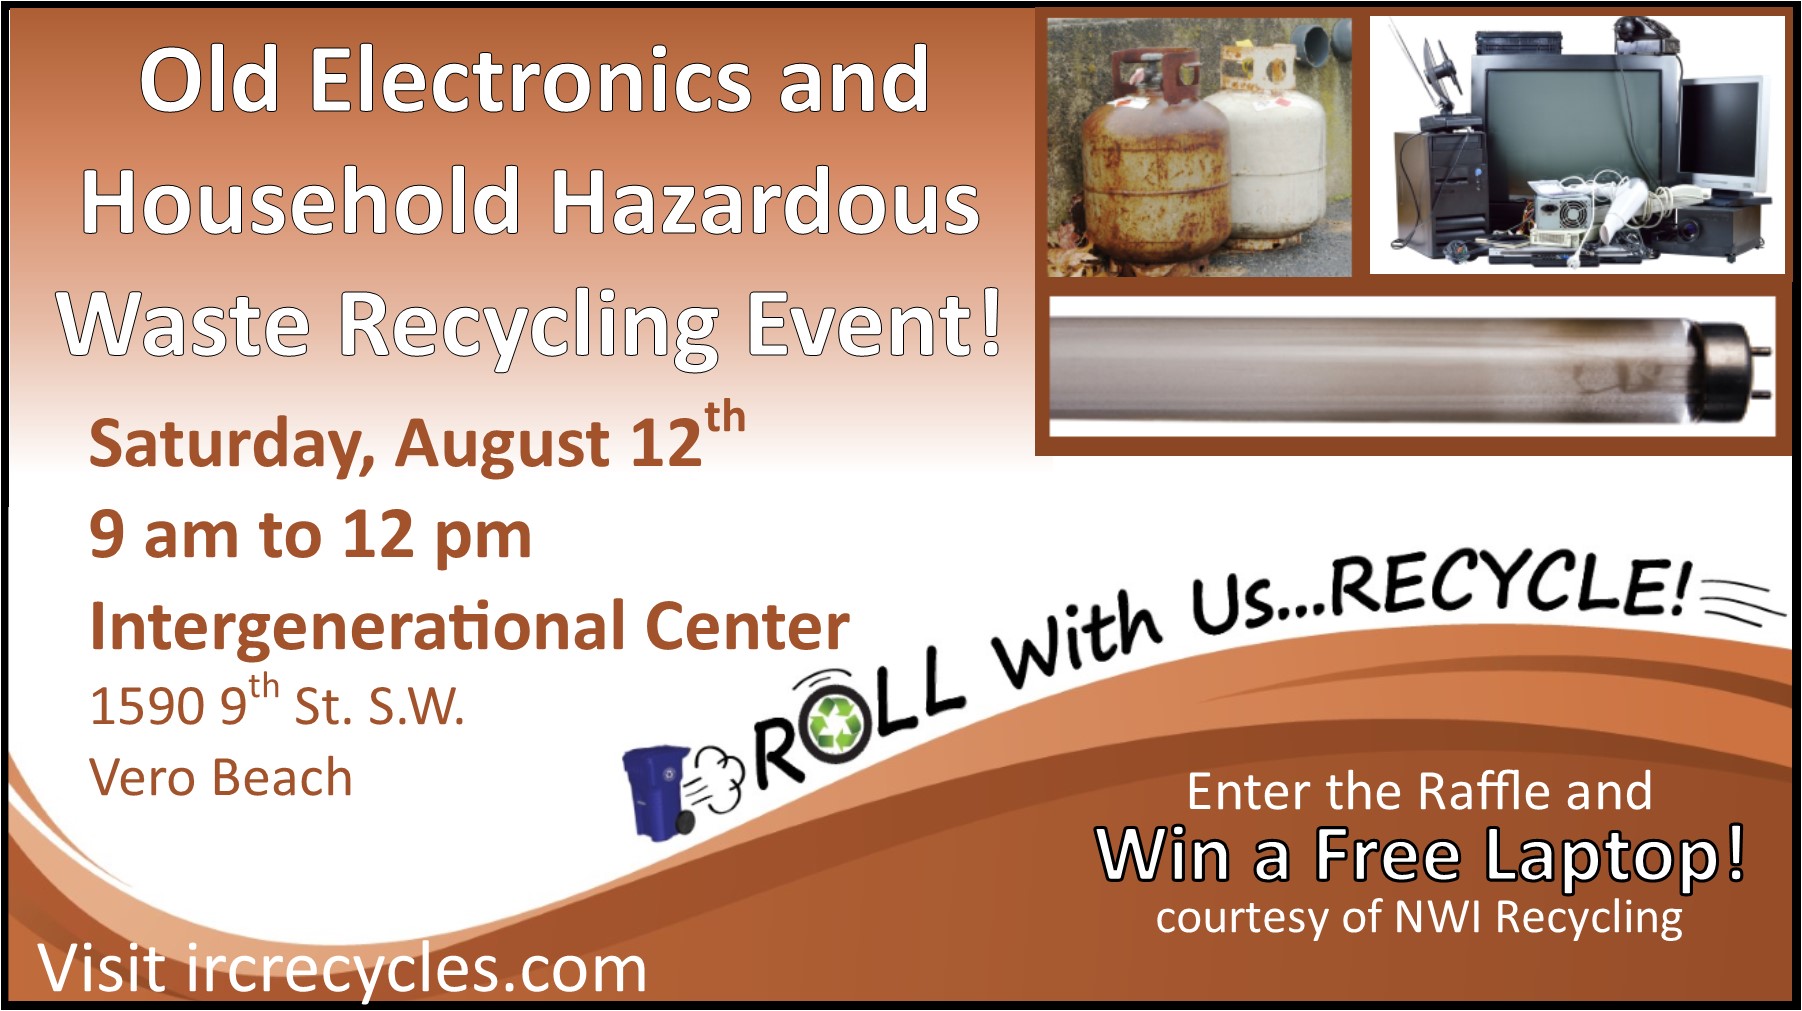 Recycling Event for Electronics and Household Hazardous Waste